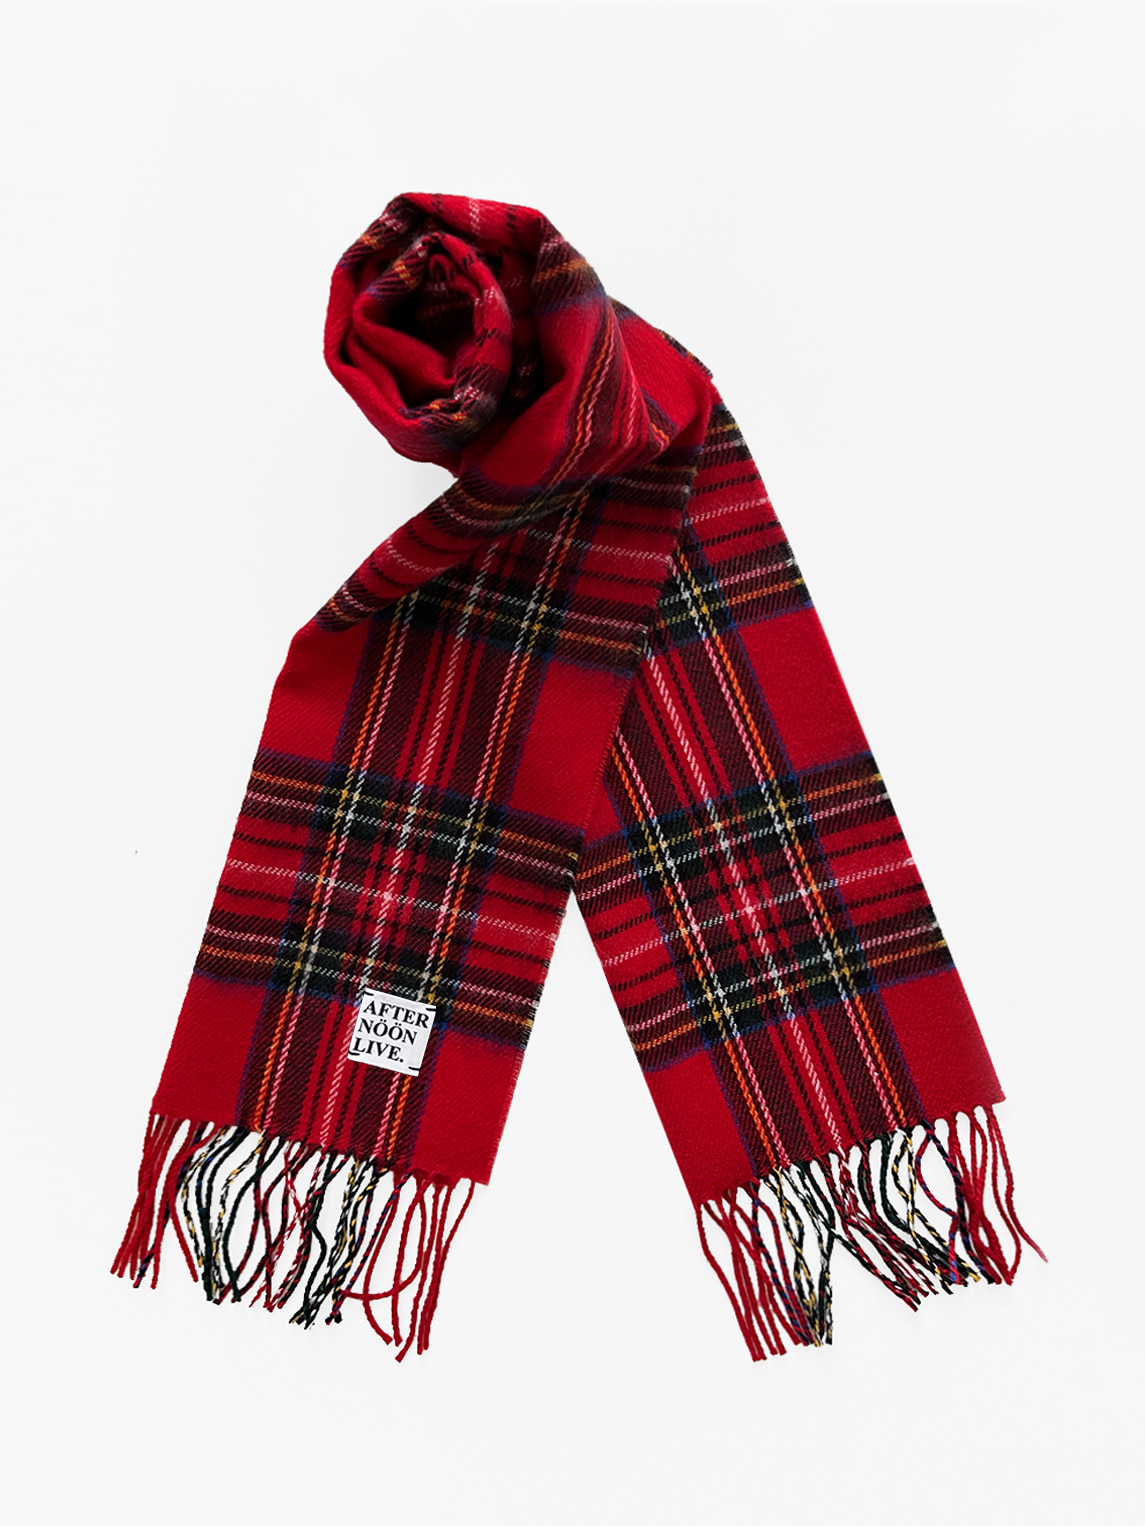 Afternoonlive Wool Muffler (90&#039;s Tartan Check Classic Red)